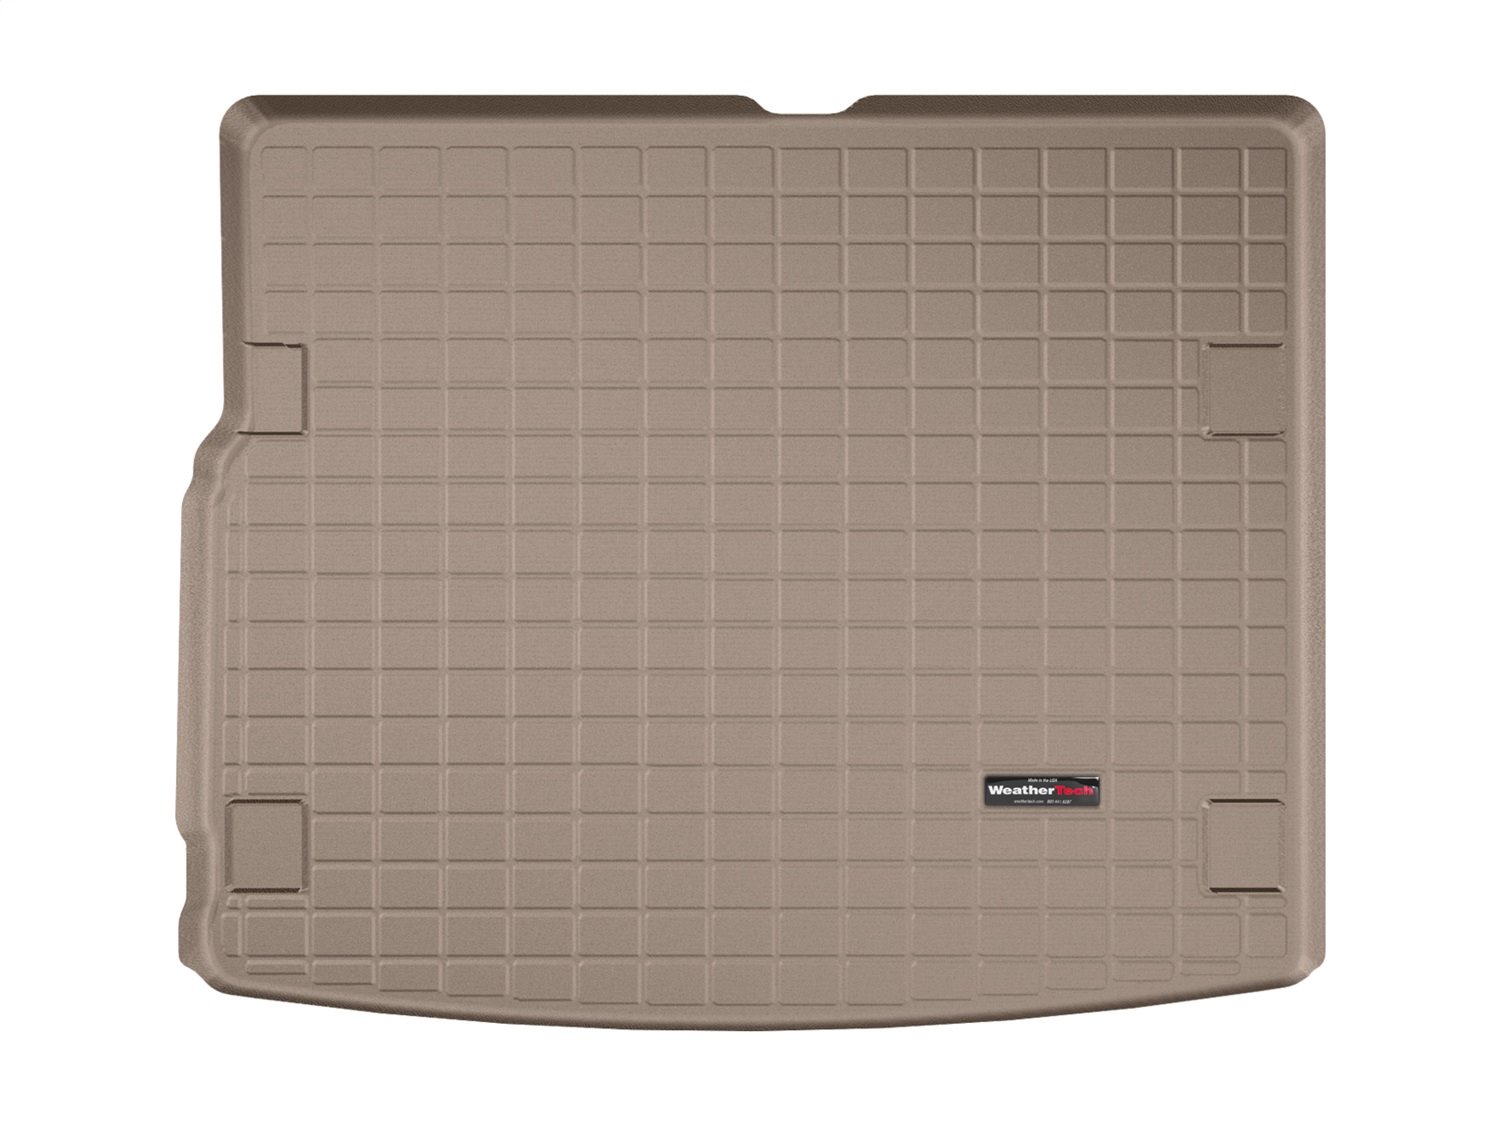 CARGO LINER BLACK VOLKSWAGEN TOUAREG 2008 -2009 FITS VEHICLES WITH 4 ZONE CLIMATE CONTROL